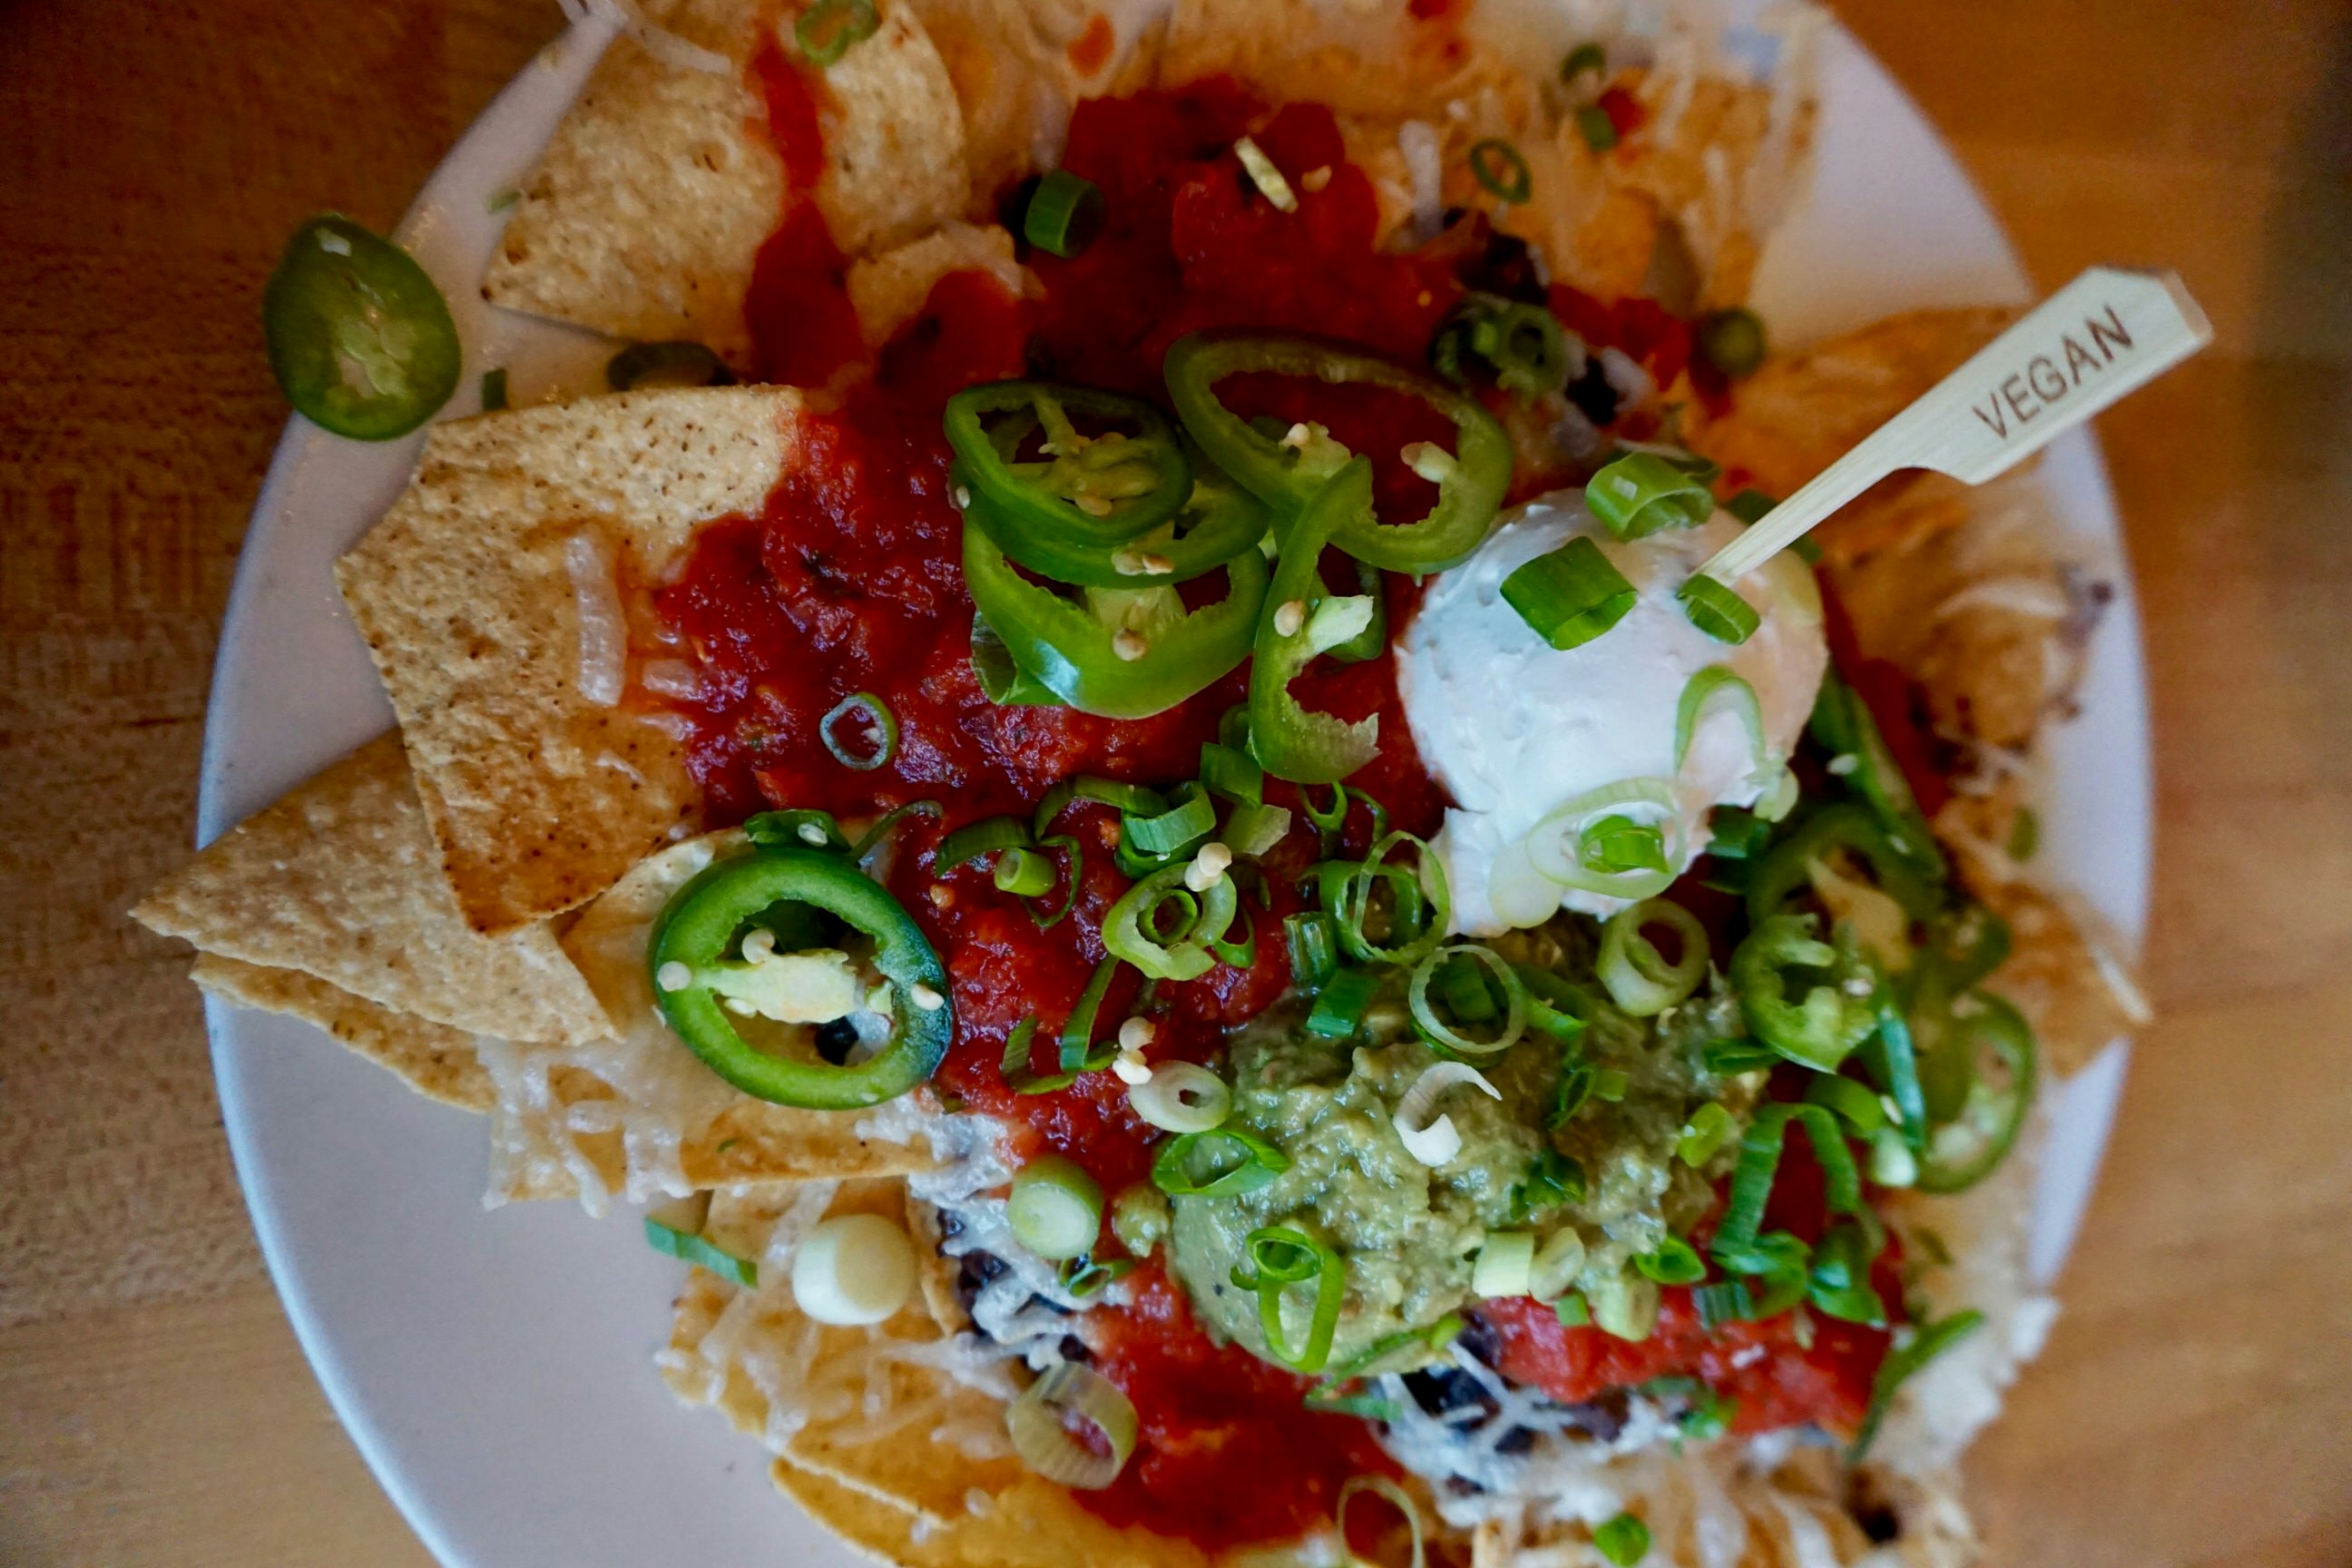 A plate of vegan nachos, piled high with tortilla chips, bright red salsa and guacamole and topped with slices of jalapenos, spring onions and a serving of vegan sour cream. There's a  wooden stick labeled 'vegan' sticking out of the cream.